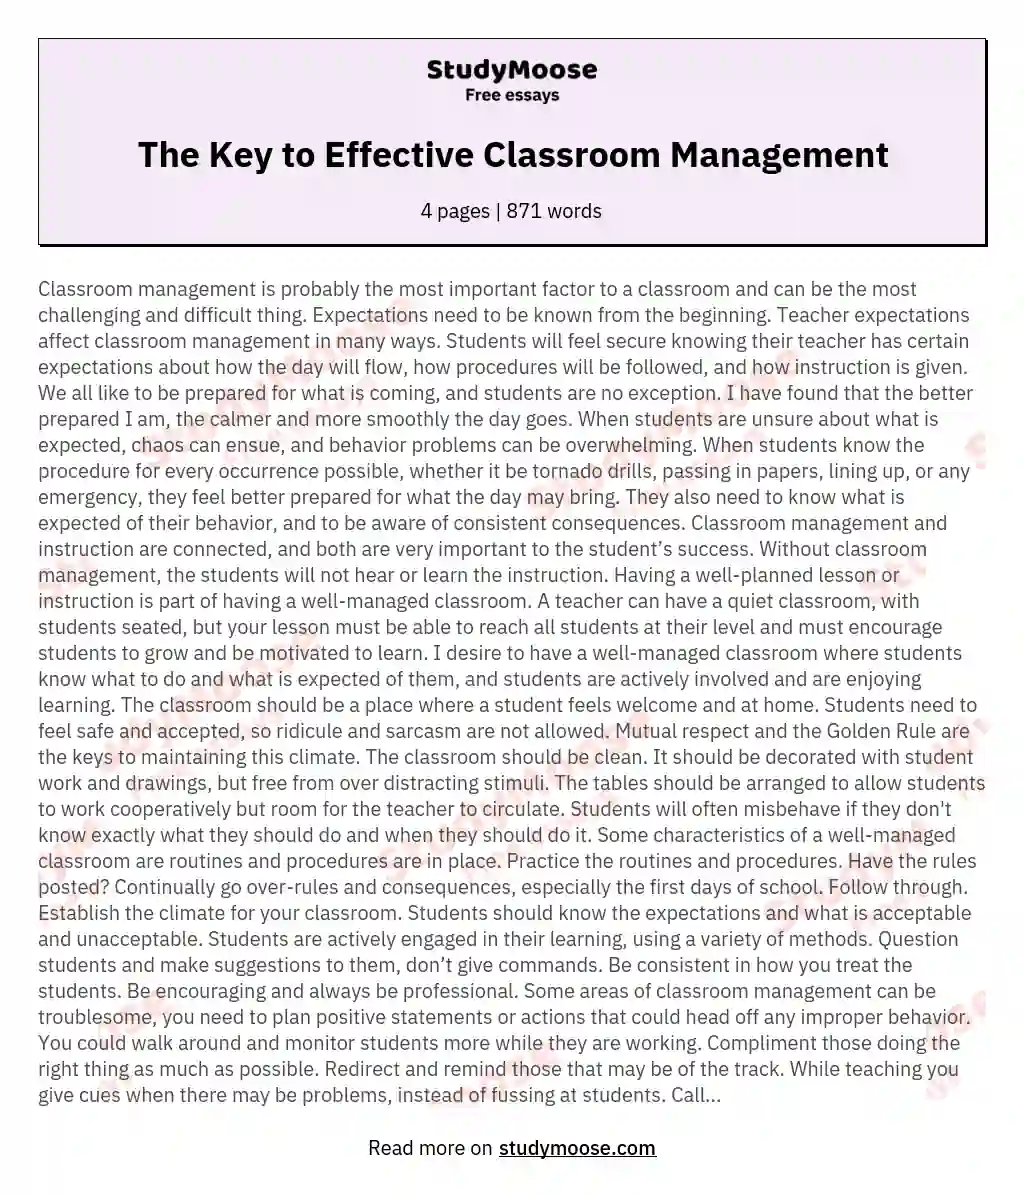 The Key to Effective Classroom Management essay